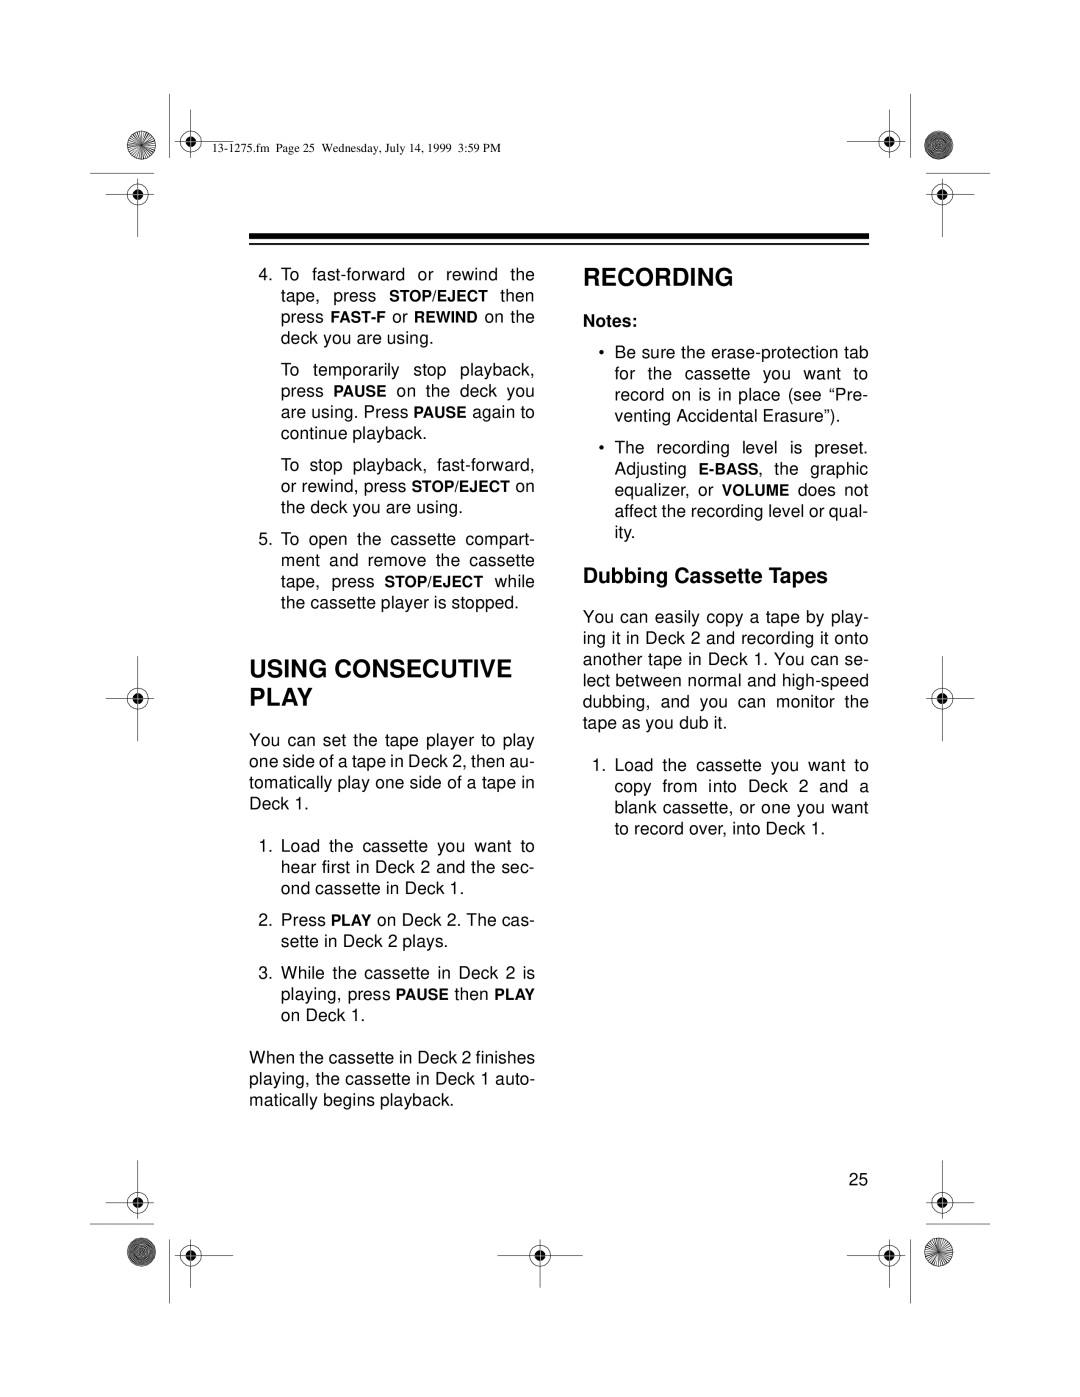 Optimus SYSTEM 728 owner manual Using Consecutive Play, Recording, Dubbing Cassette Tapes 